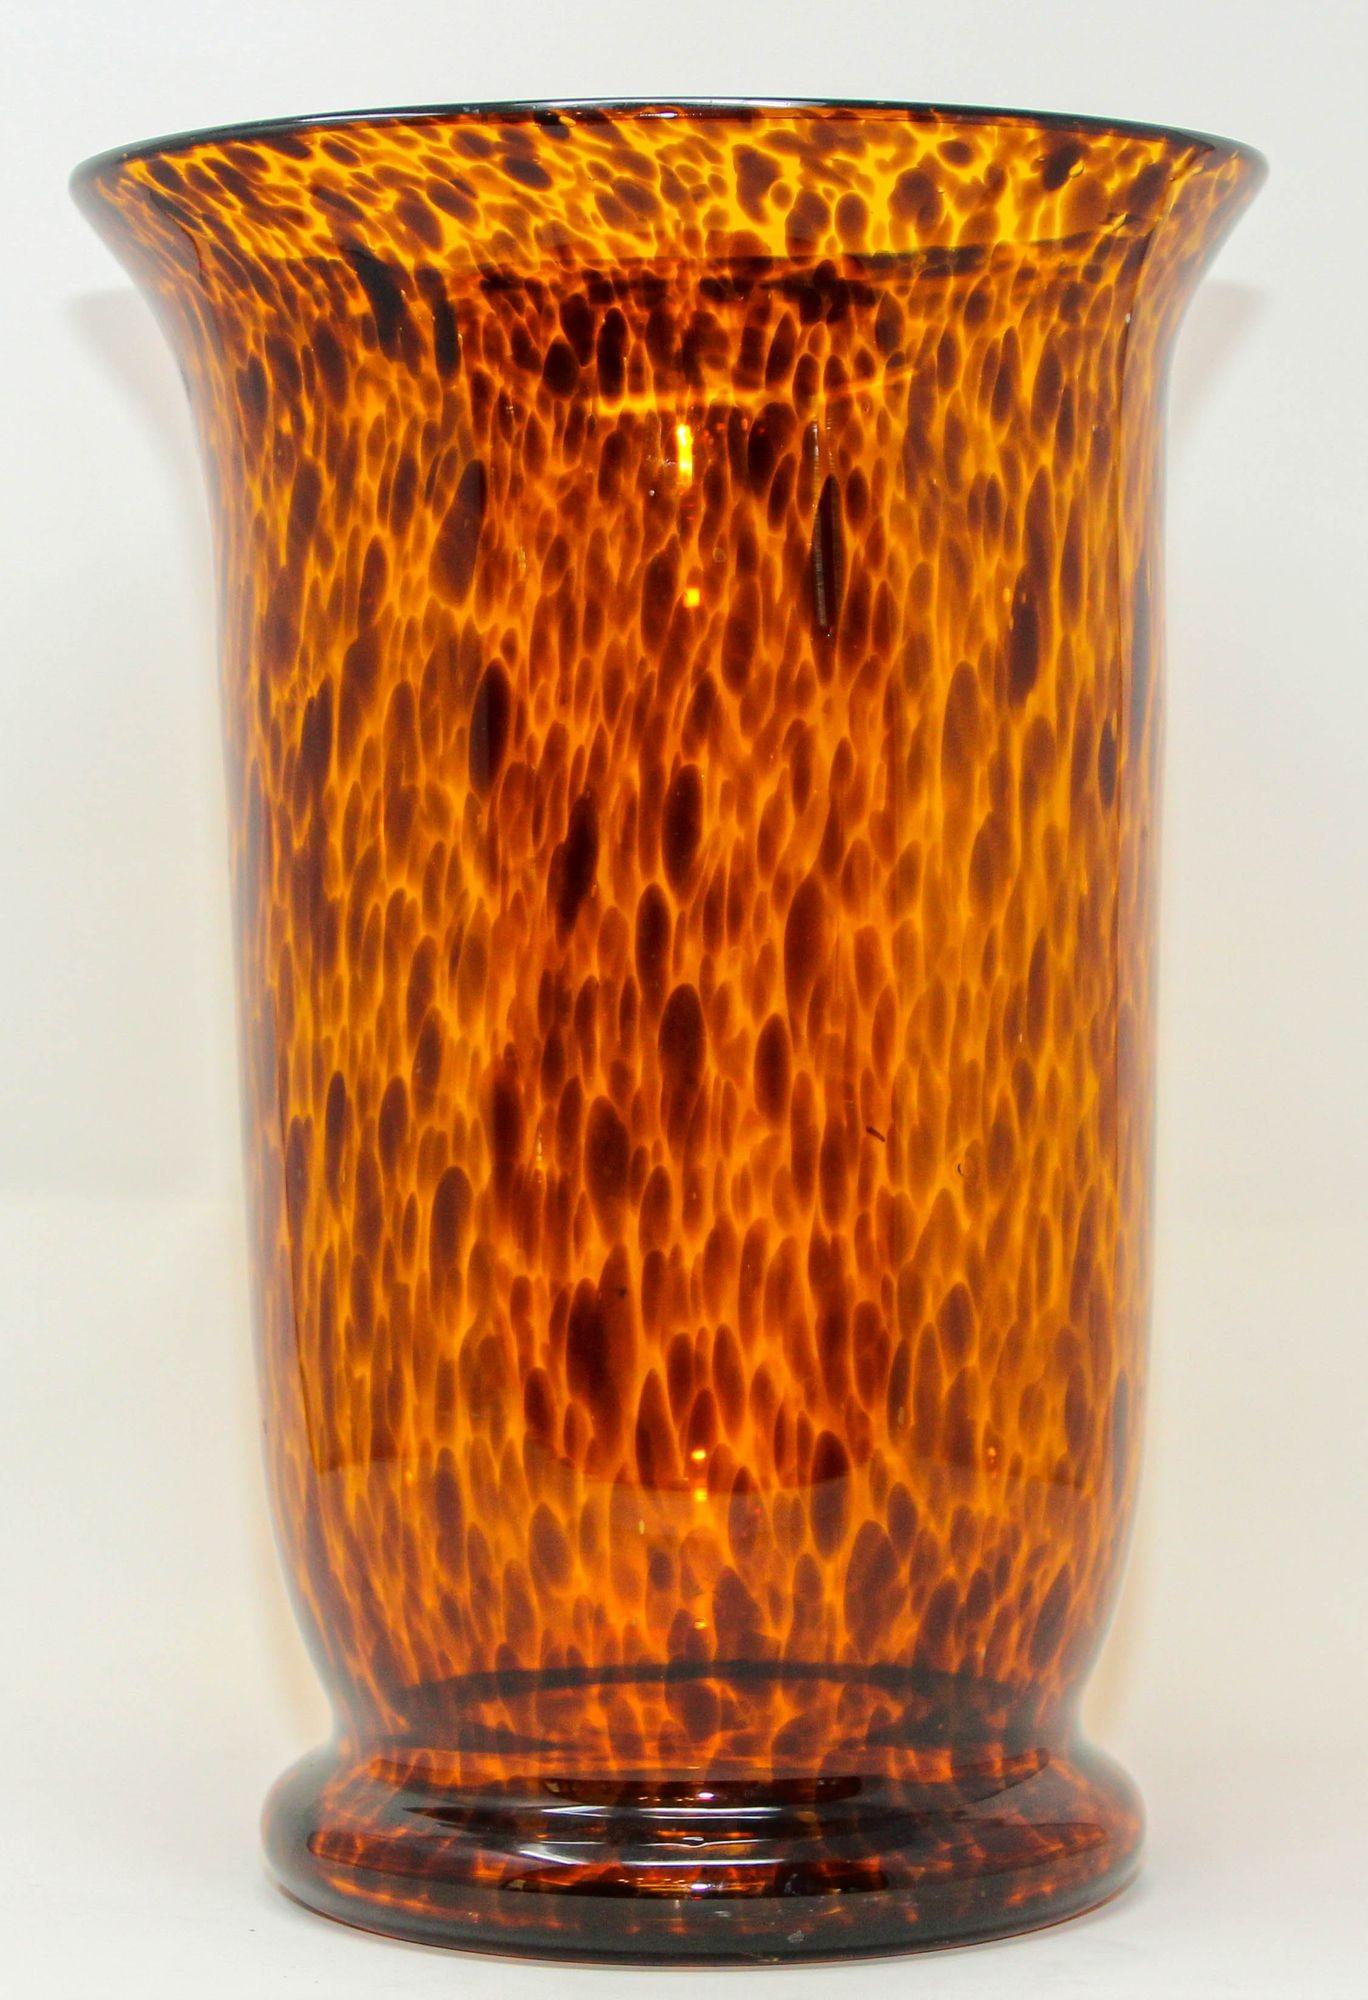 Vintage Faux Tortoise Shell Blown Art Glass Vase.
Mid-Century Modern faux tortoise shell style blown glass vase.
The tortoise pattern has beautiful deep topaz, brown, caramel and amber coloring.
This is an absolutely gorgeous hand blown amber To